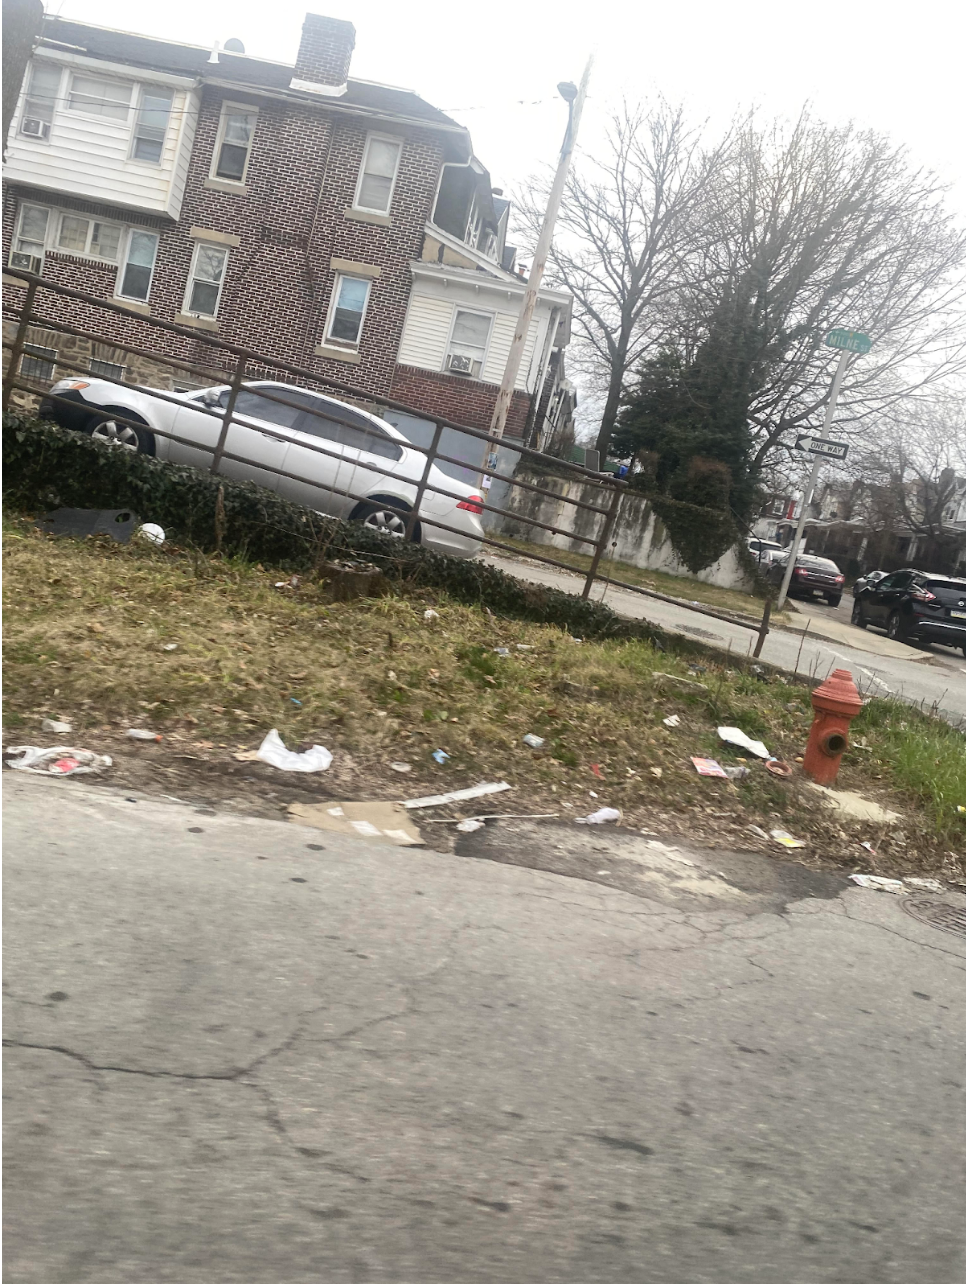 Philly%E2%80%99s+Litter%3A+Help+Clean+Up